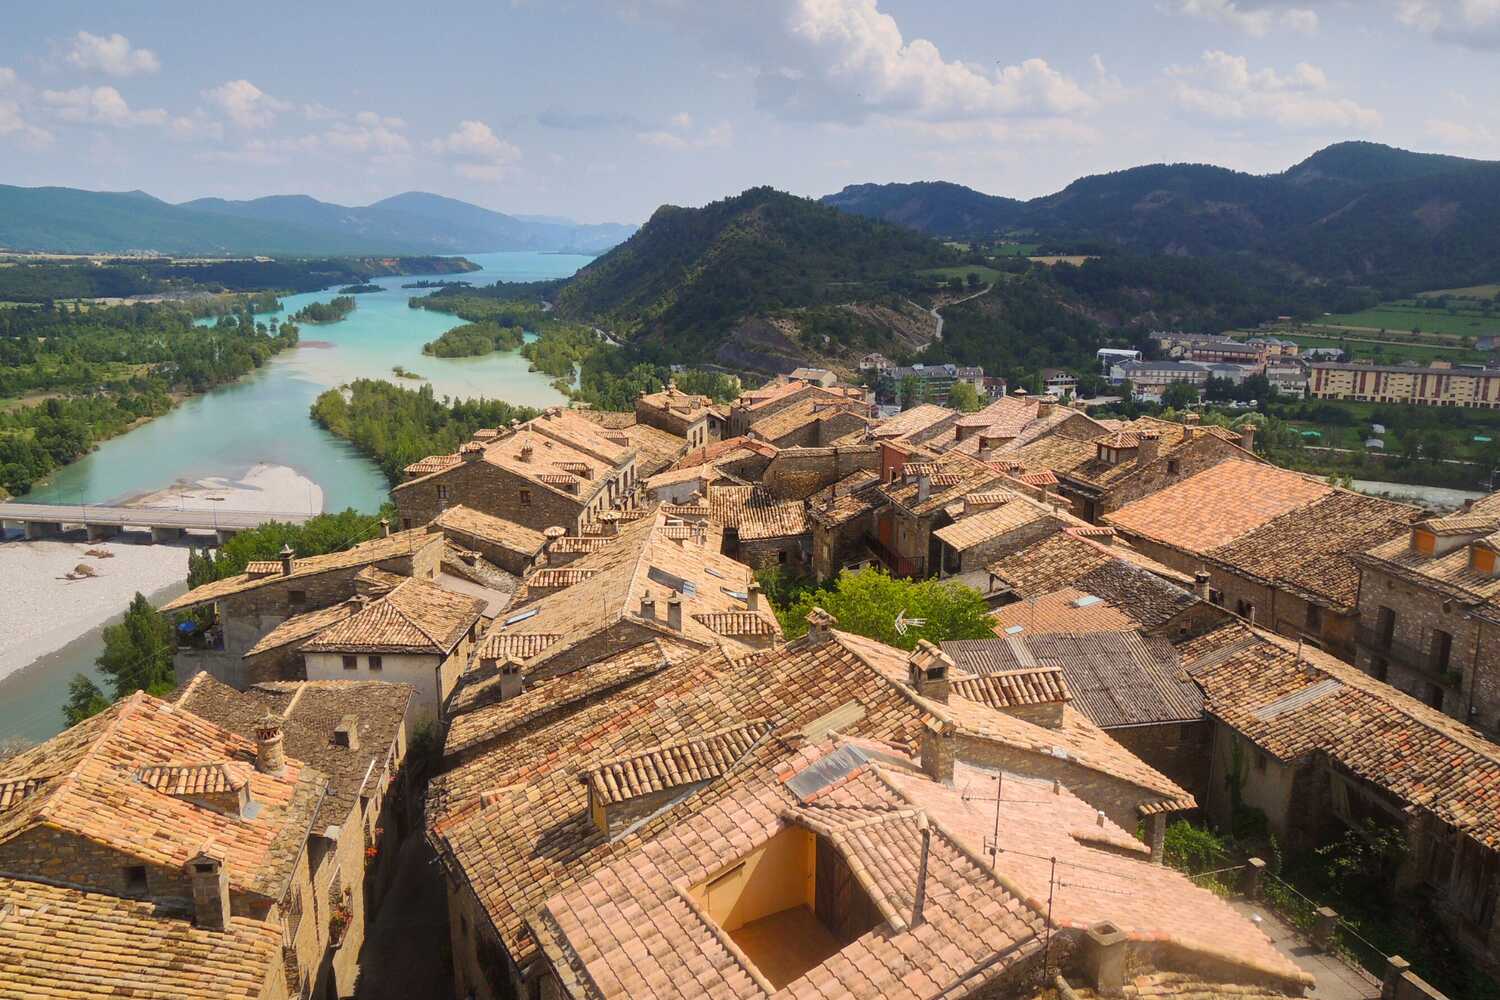 Aerial view of Ainsa Aragon with historical buildings and a river